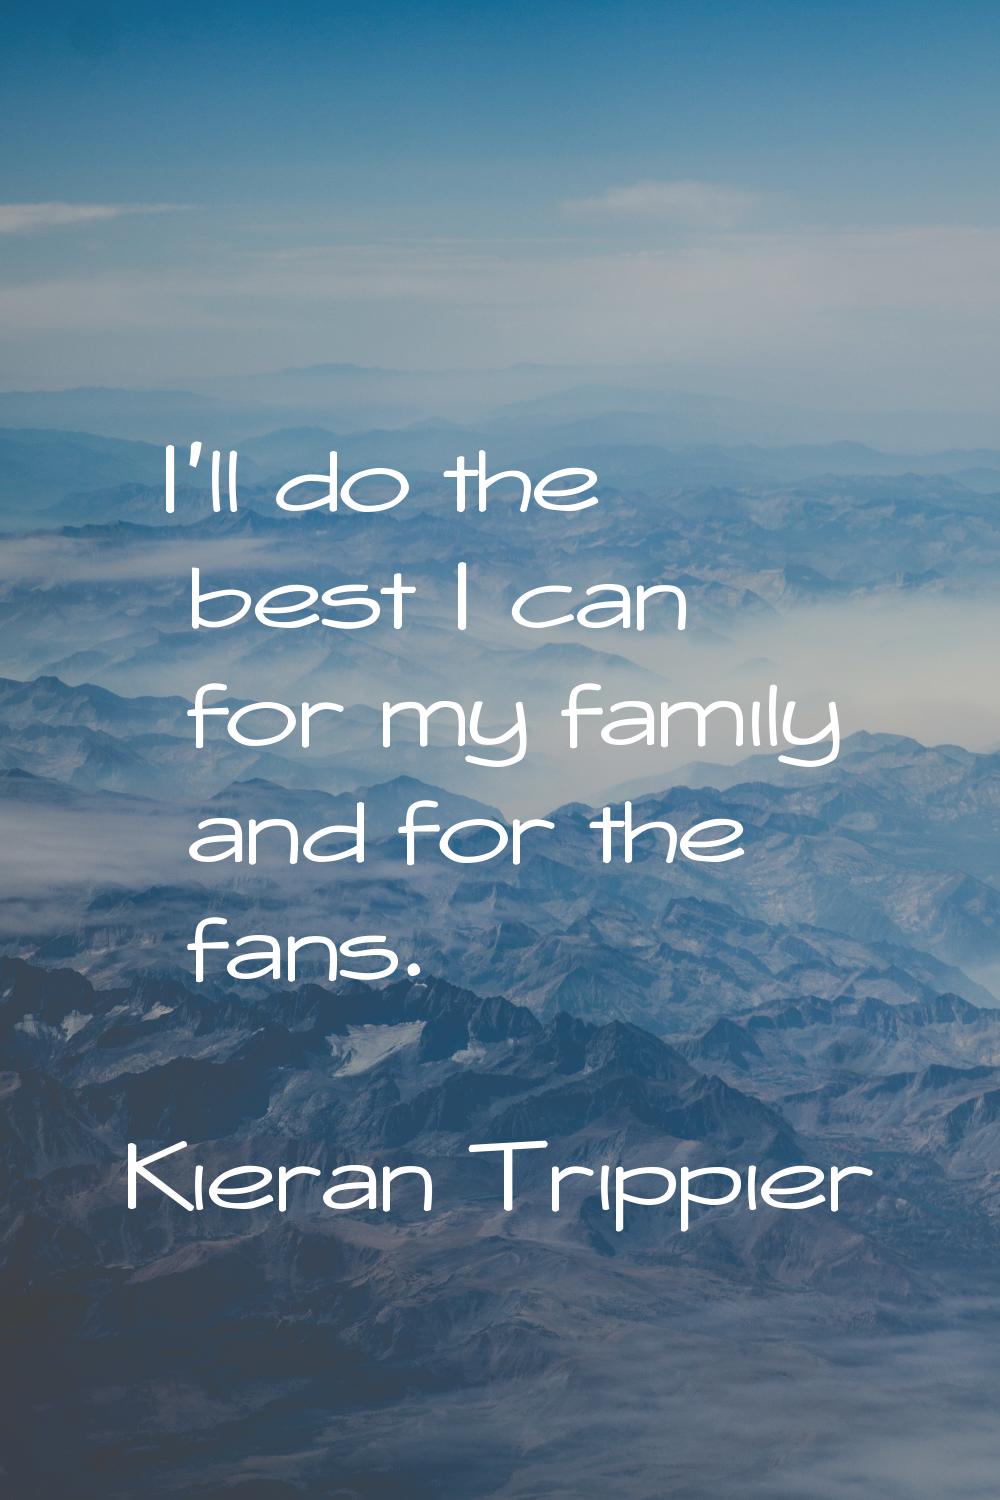 I'll do the best I can for my family and for the fans.